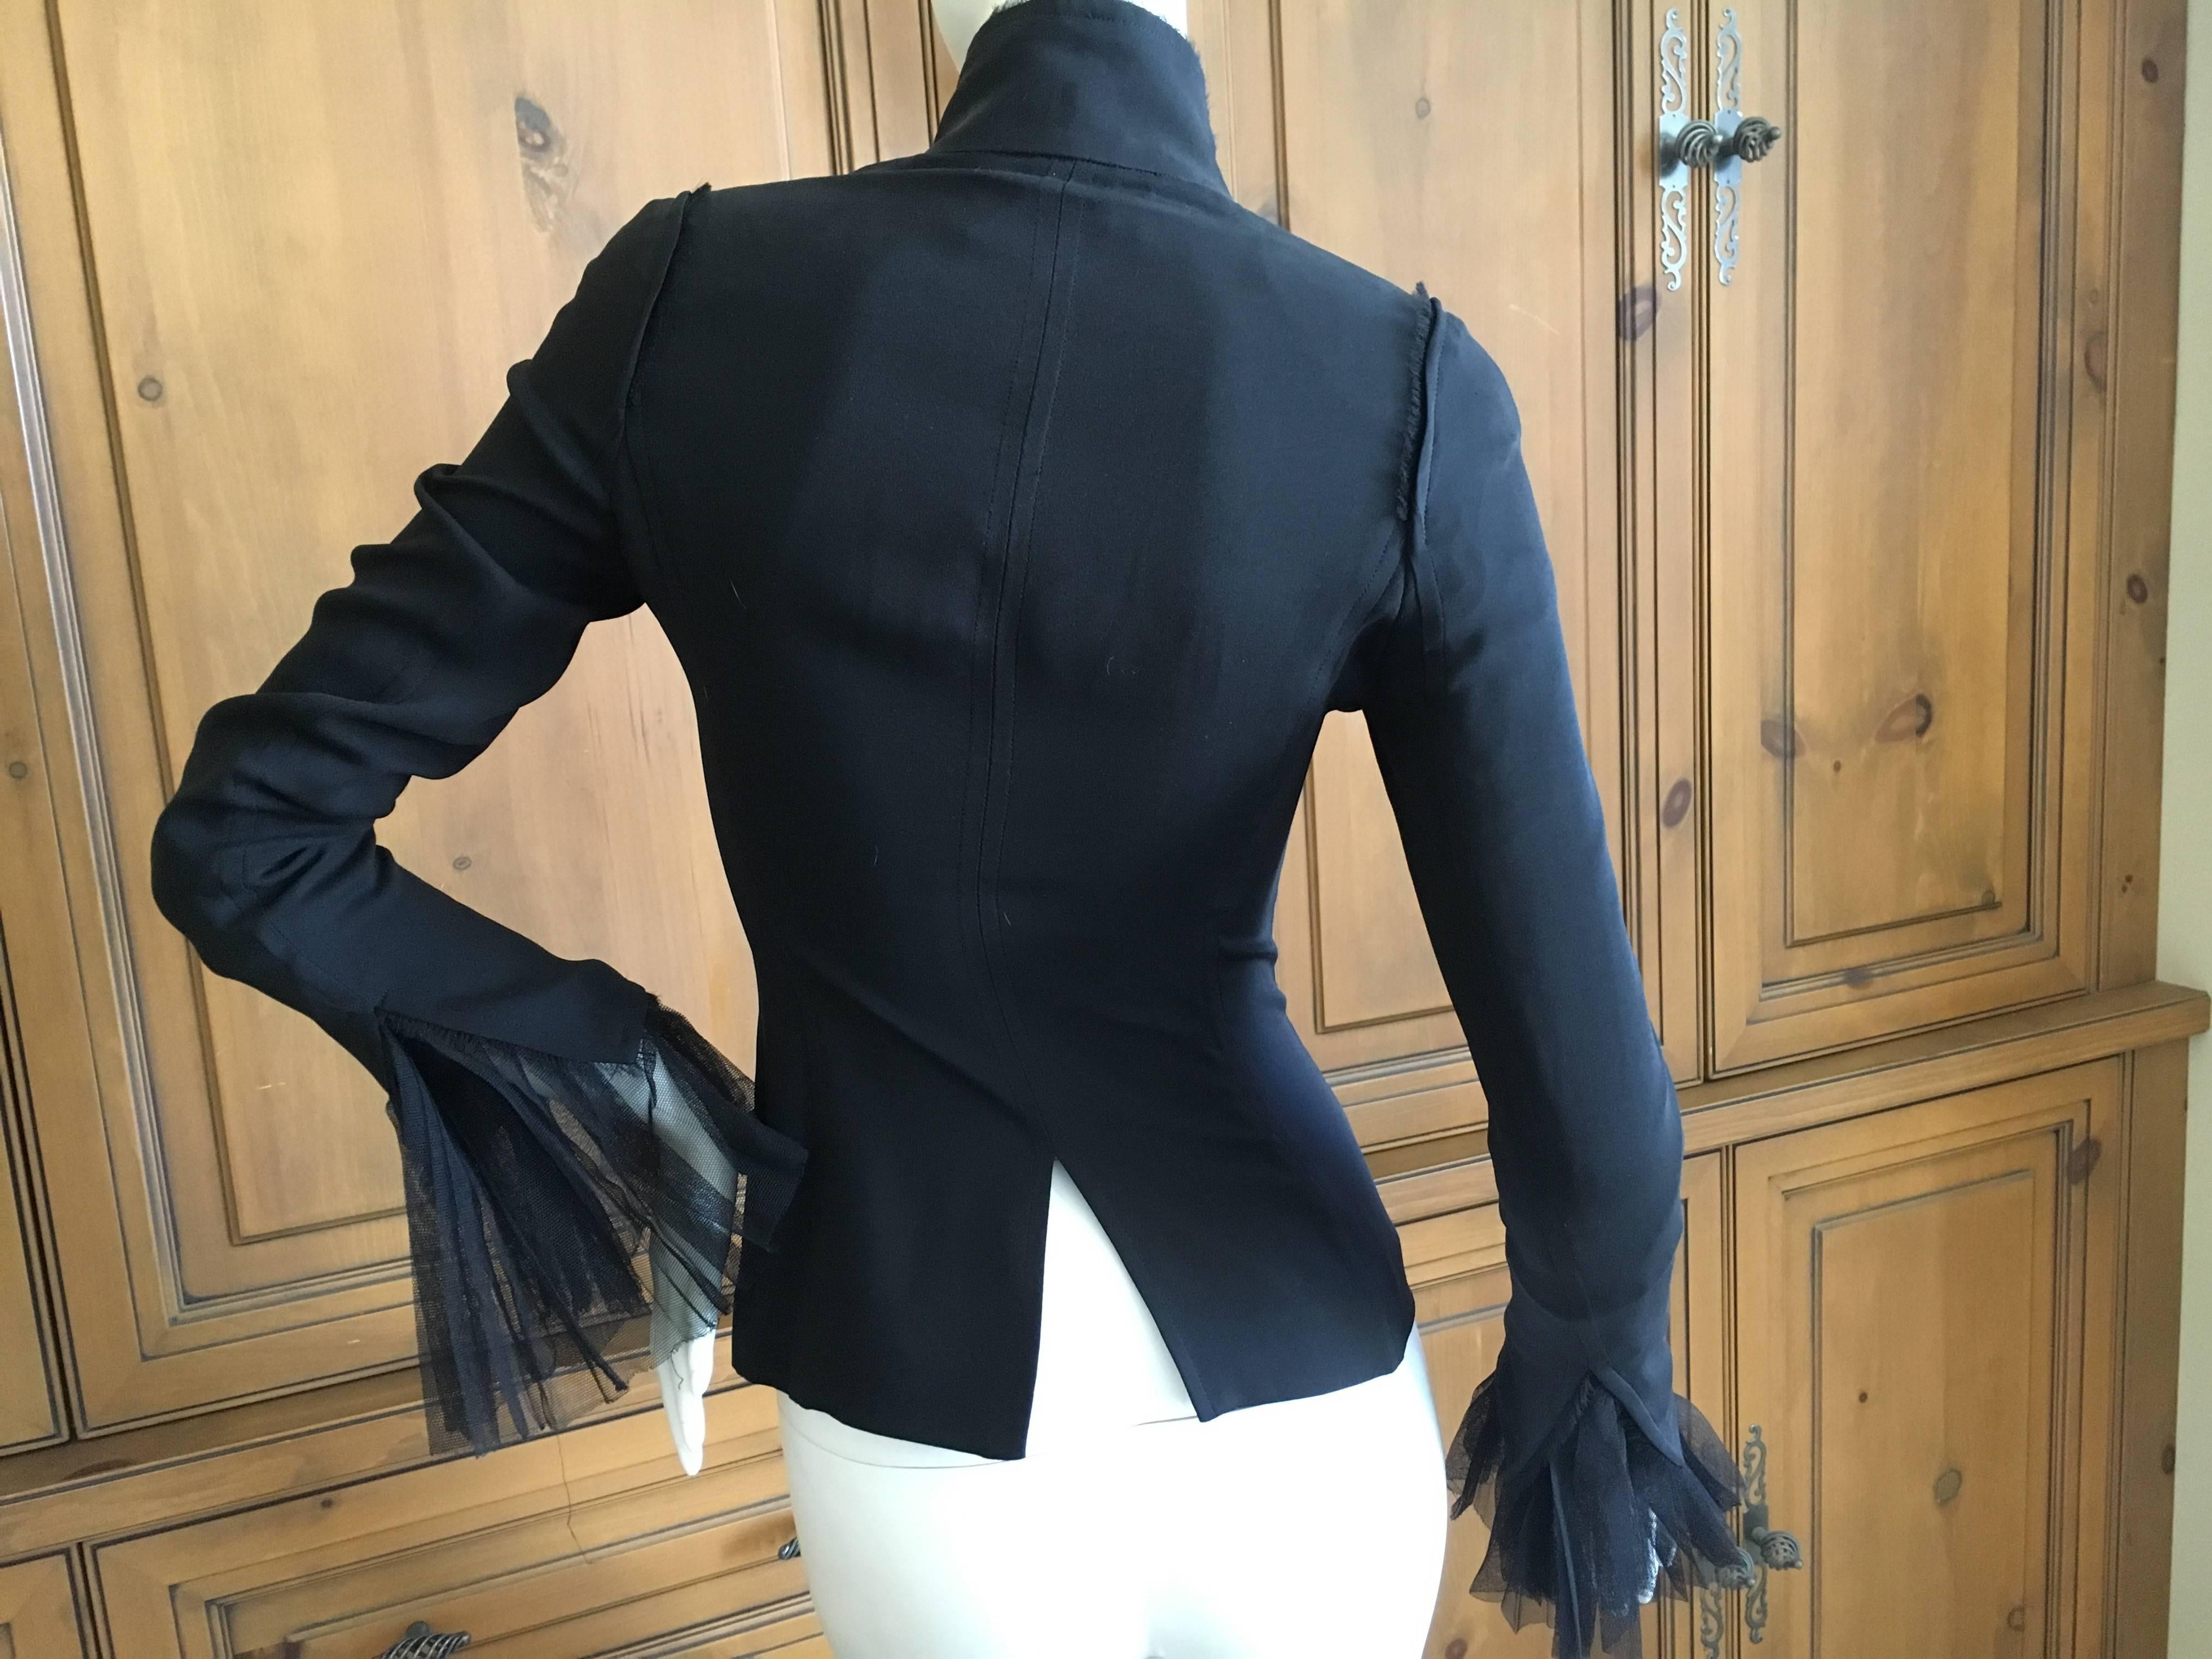 Yves Saint Laurent by Tom Ford Tie Front Black Jacket.
Size 36
Bust 34"
Waist 26"
Length 25"
Excellent condition